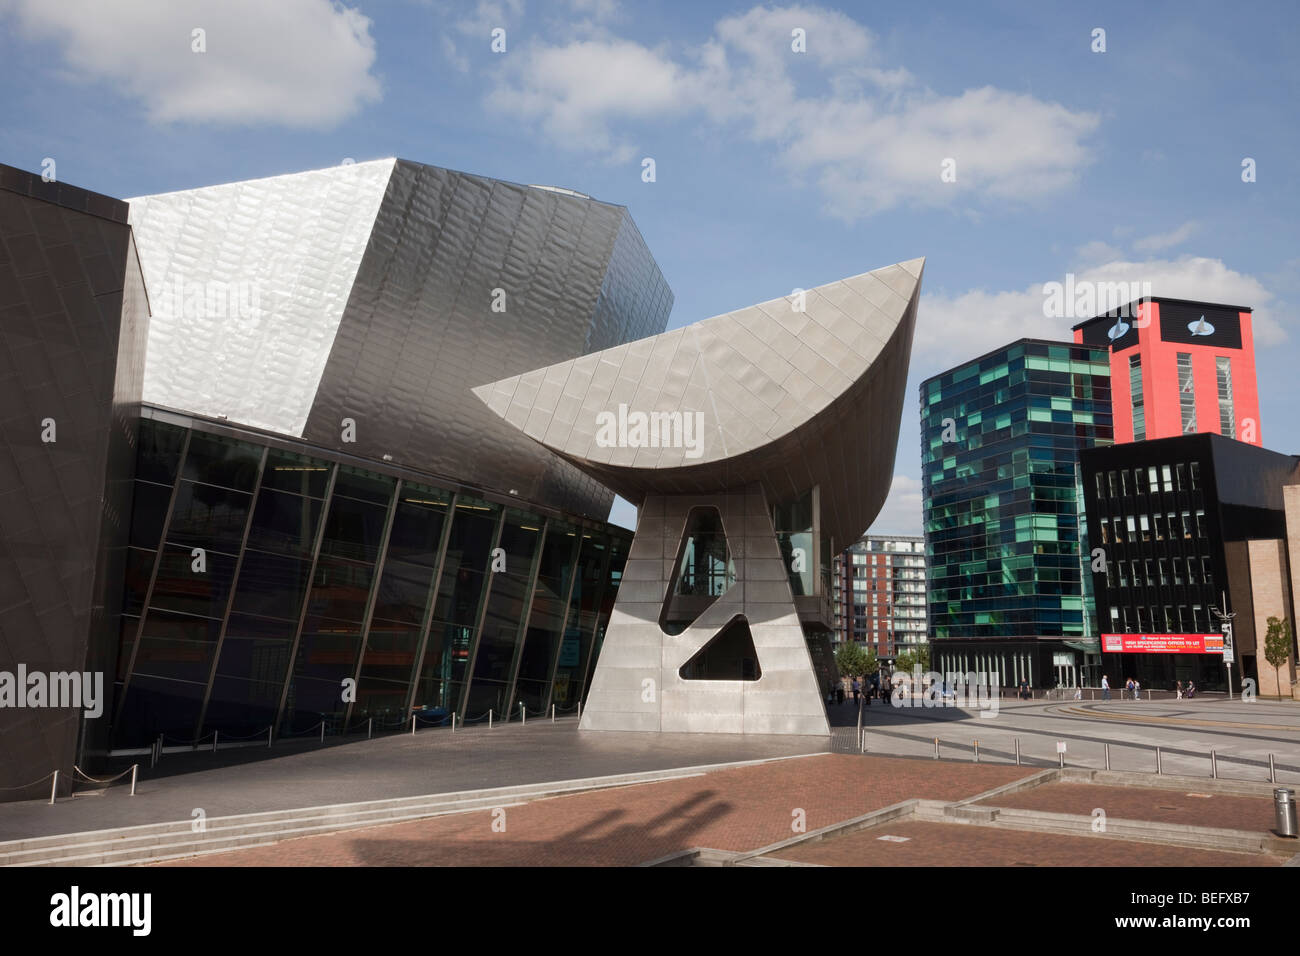 The Lowry Centre arts complex in modern building in Salford Quays, Greater Manchester, England, UK, Britain Stock Photo